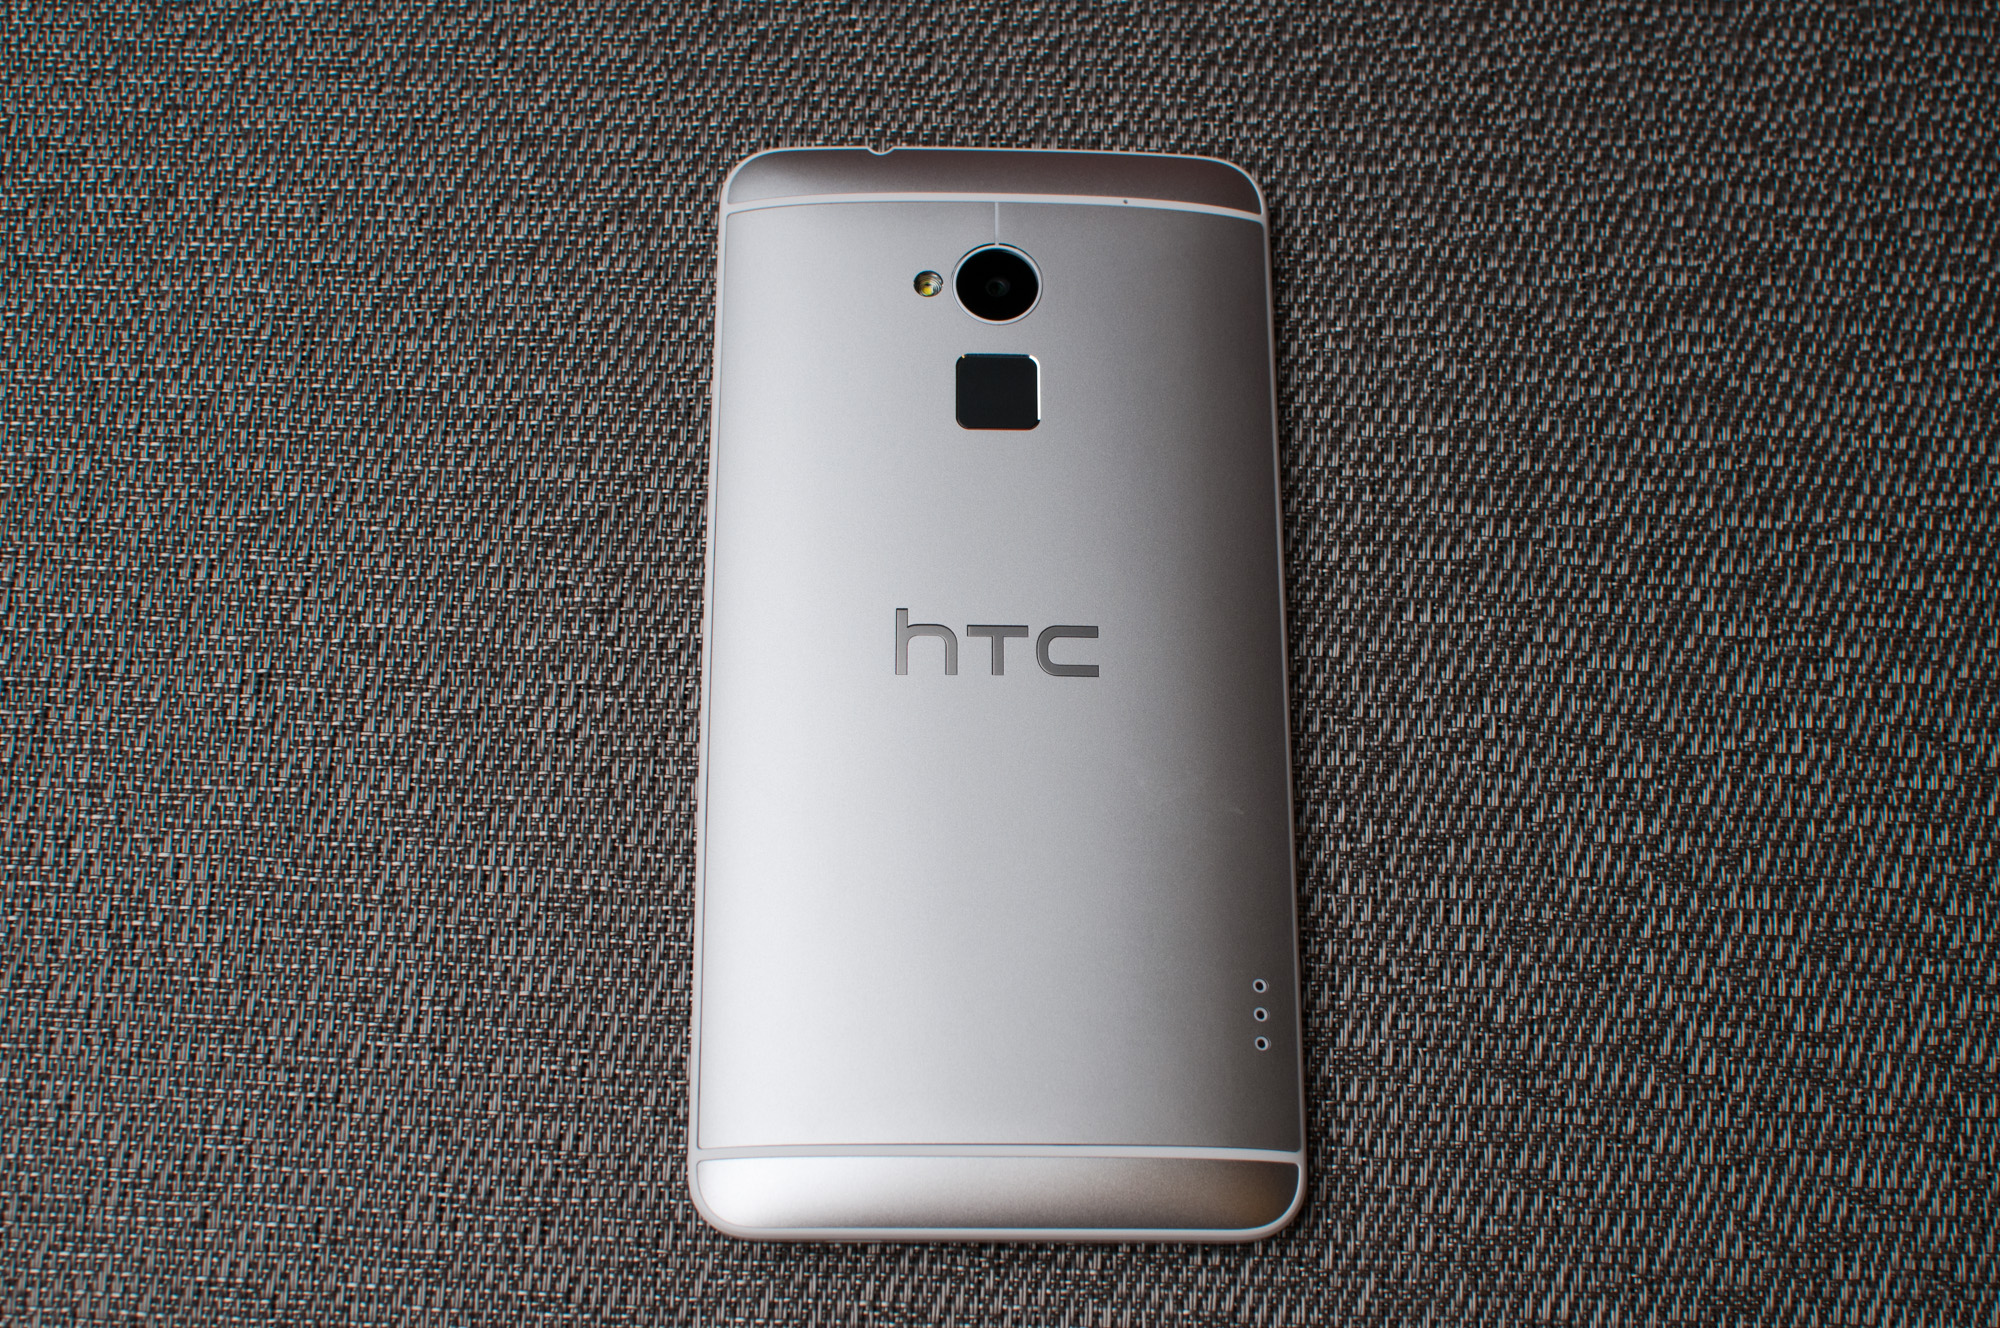 Lelie niets Italiaans Final Thoughts - HTC One max Review - It's Huge